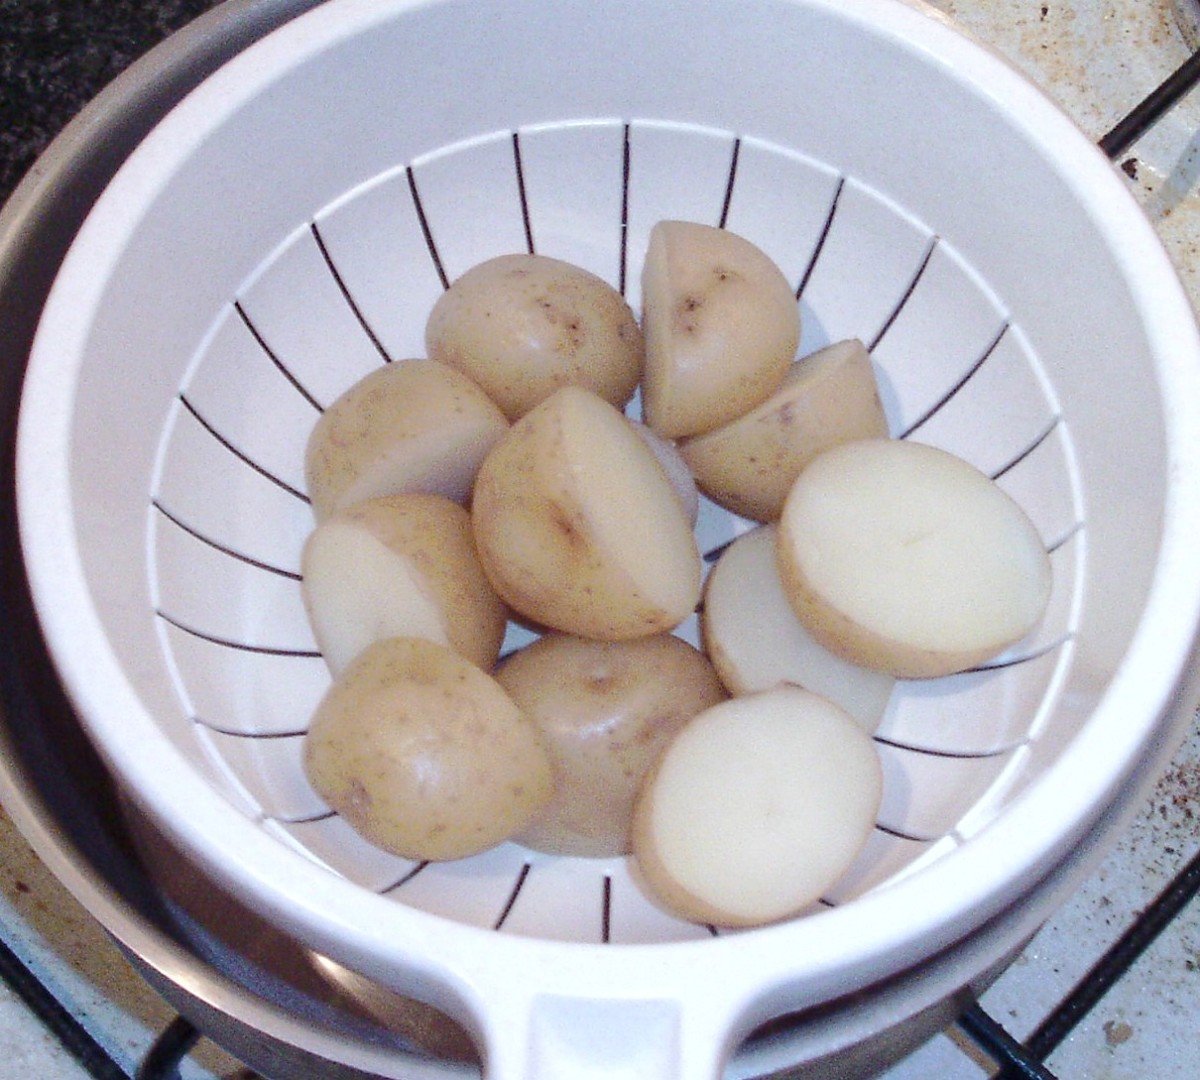 Boiled and drained potato halves of potatoes.